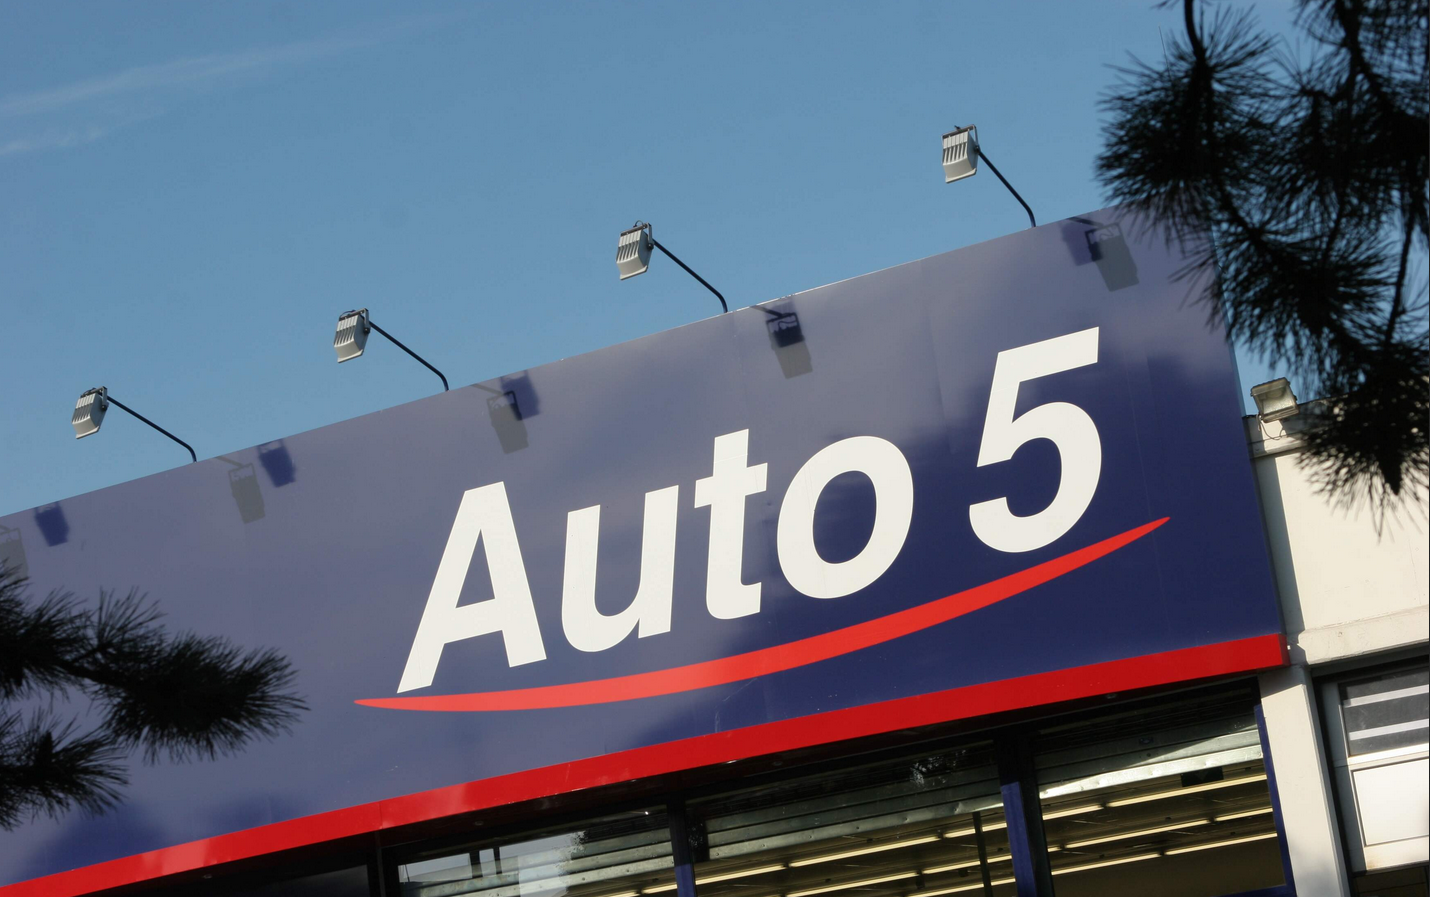 Auto 5 chain to offer private leasing